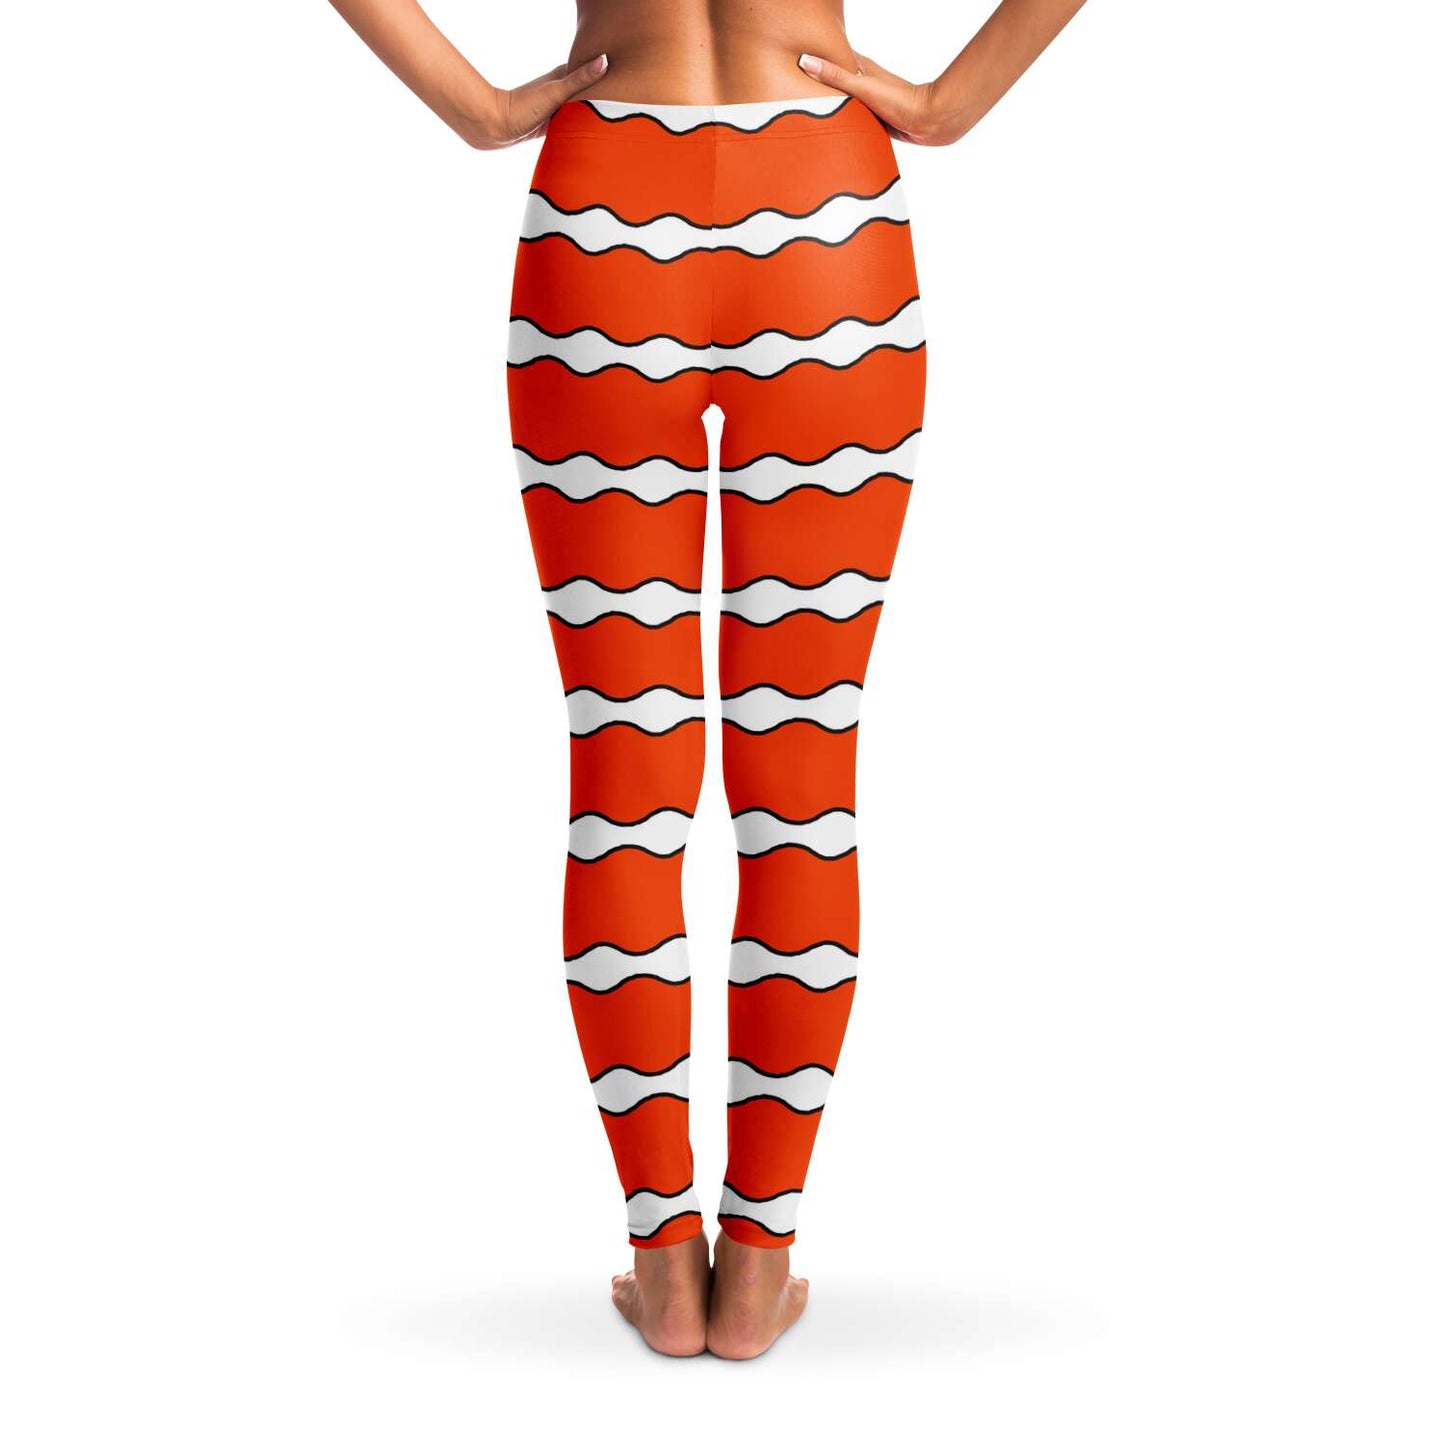 Back view on model of clownfish leggings / skins for scuba diving, yoga and other sports